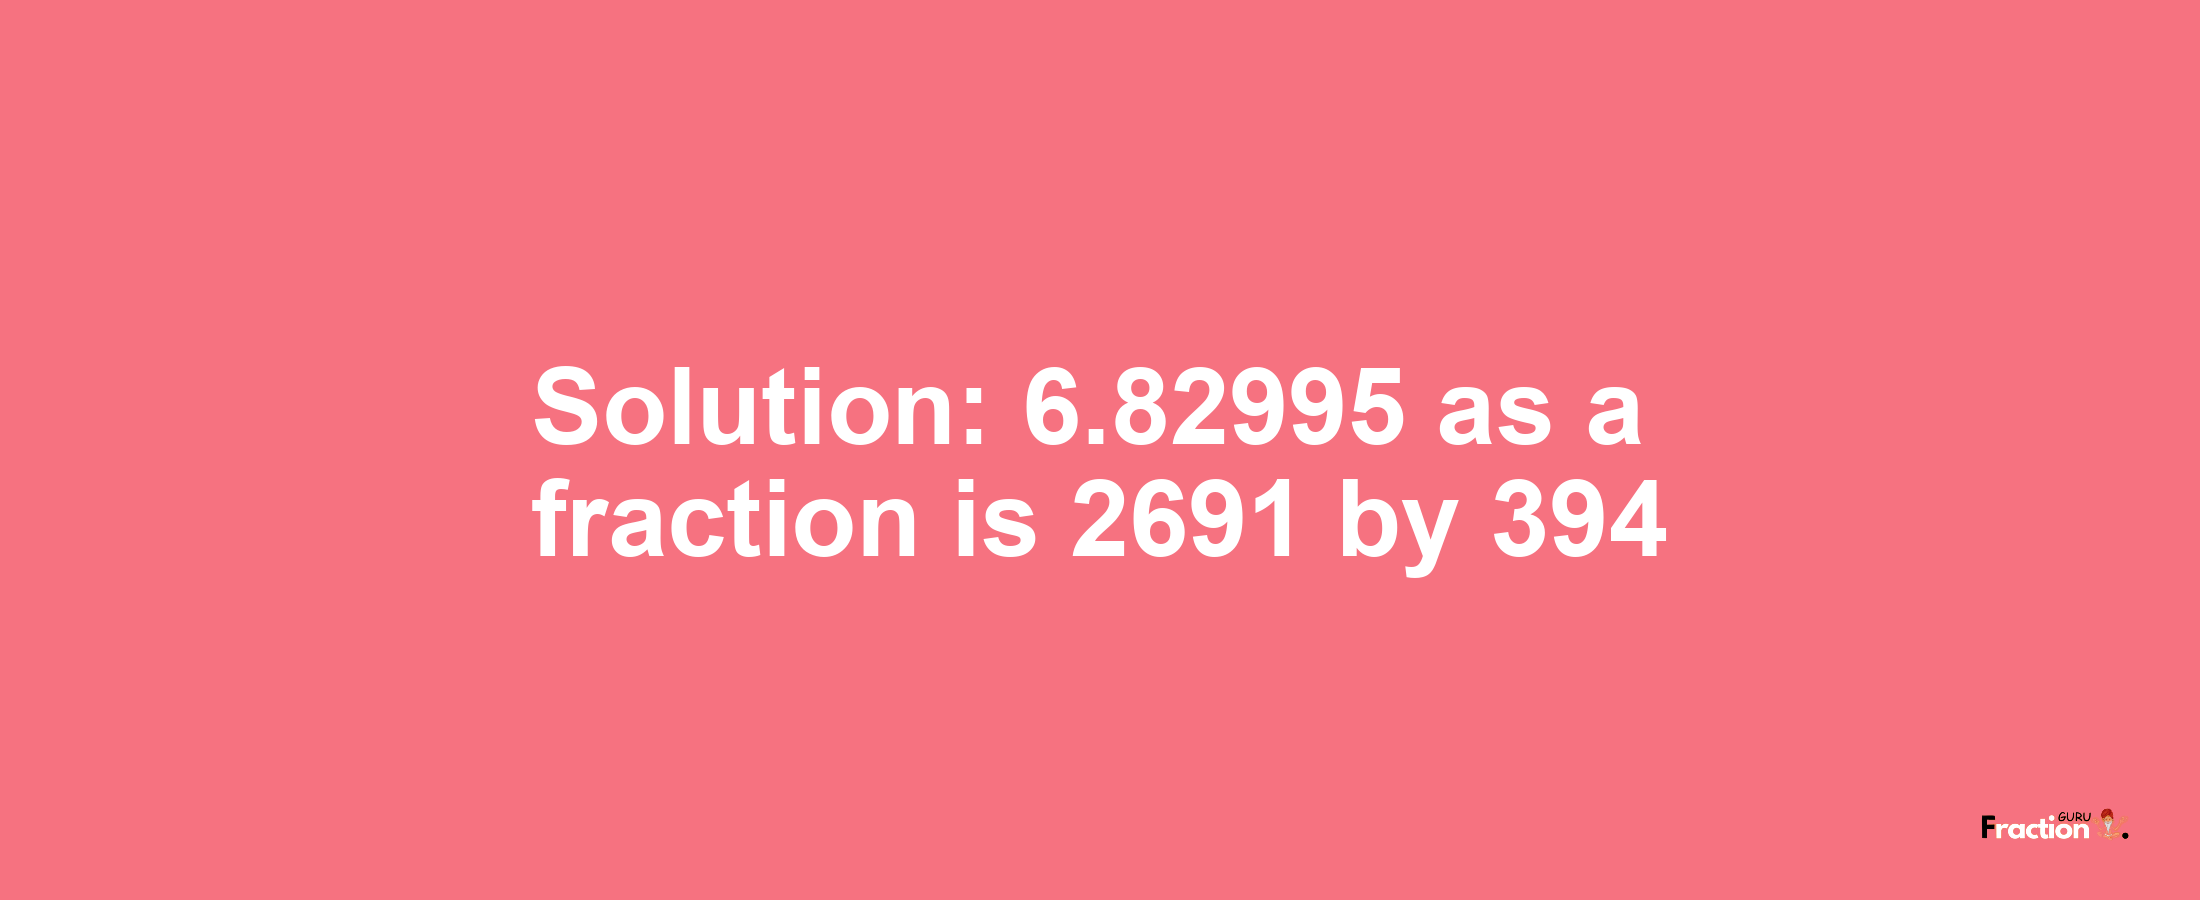 Solution:6.82995 as a fraction is 2691/394